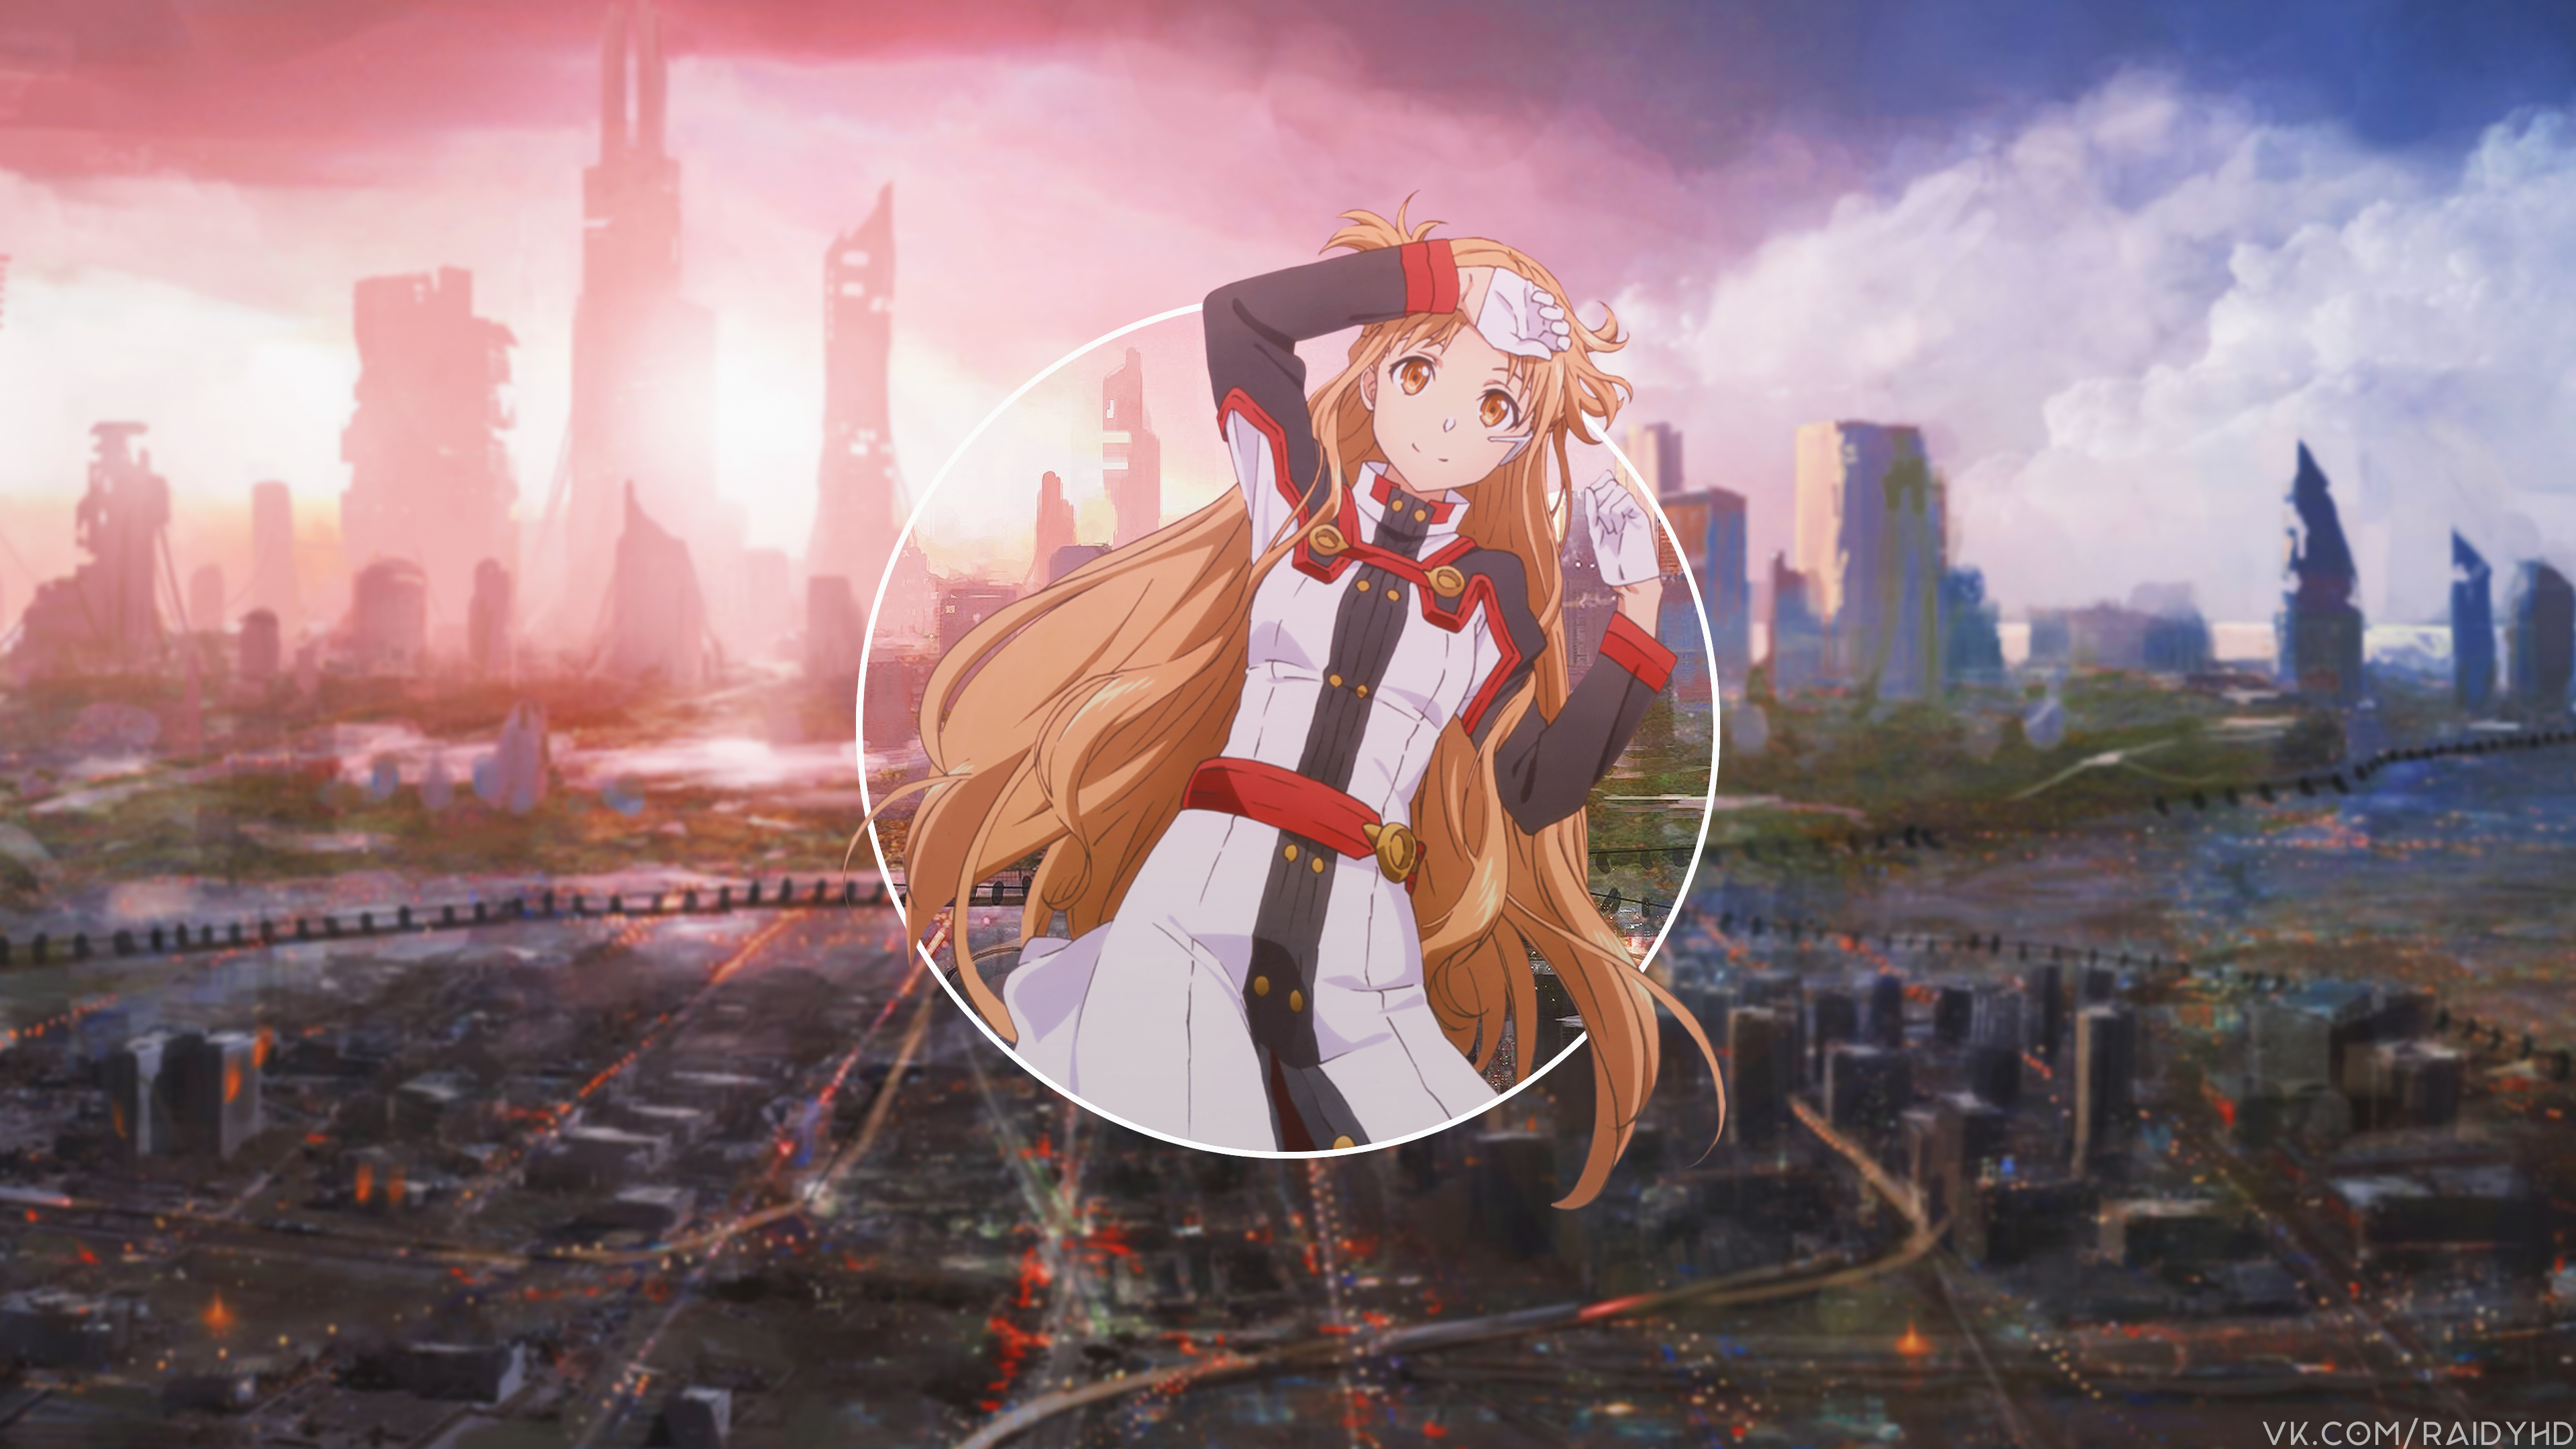 Anime 3840x2160 anime anime girls picture-in-picture Sword Art Online Yuuki Asuna (Sword Art Online) long hair cityscape arms up